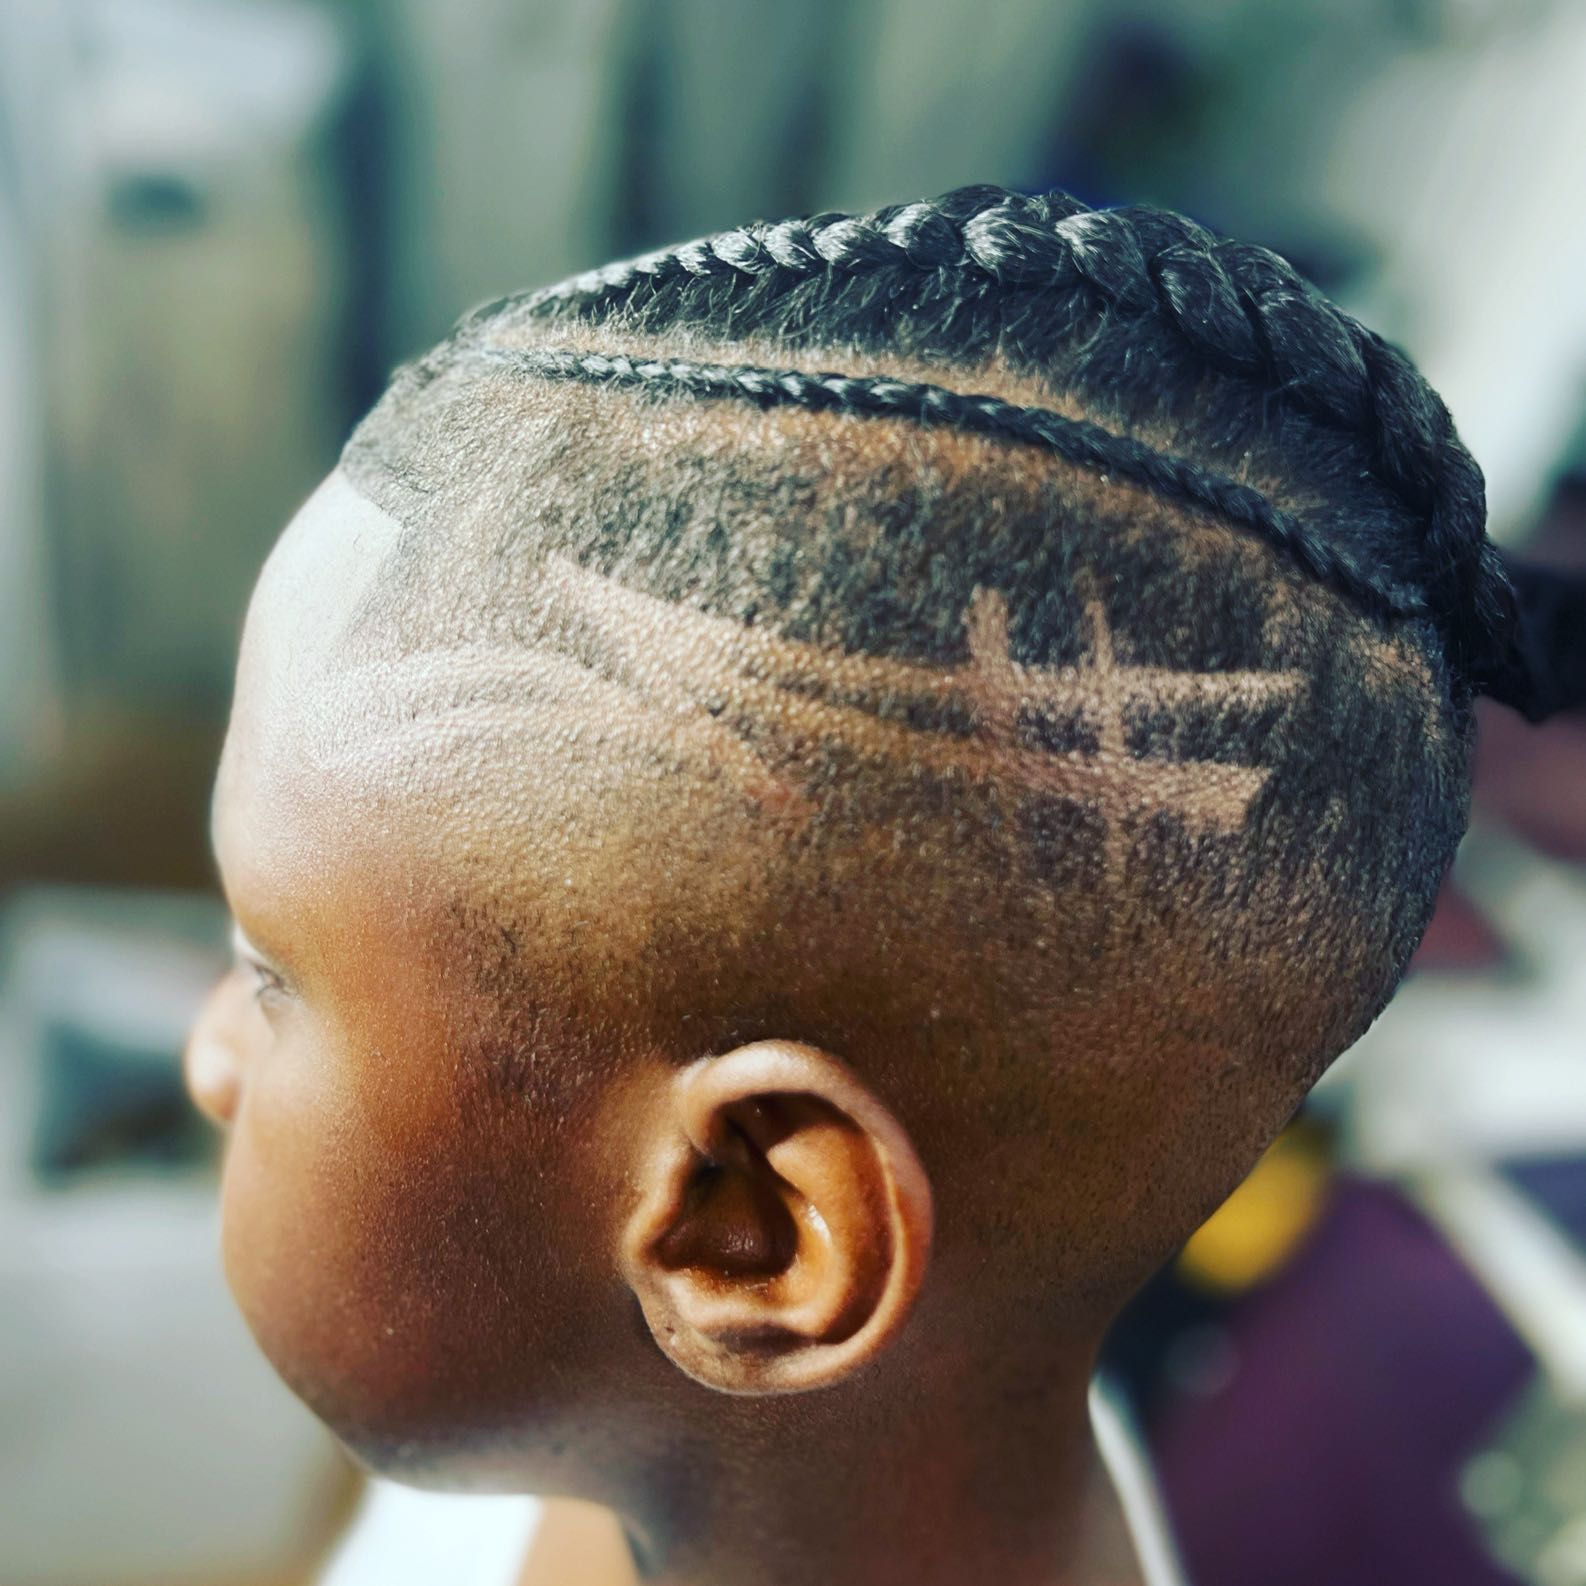 Childrens Haircut ages 1-12yrs old portfolio